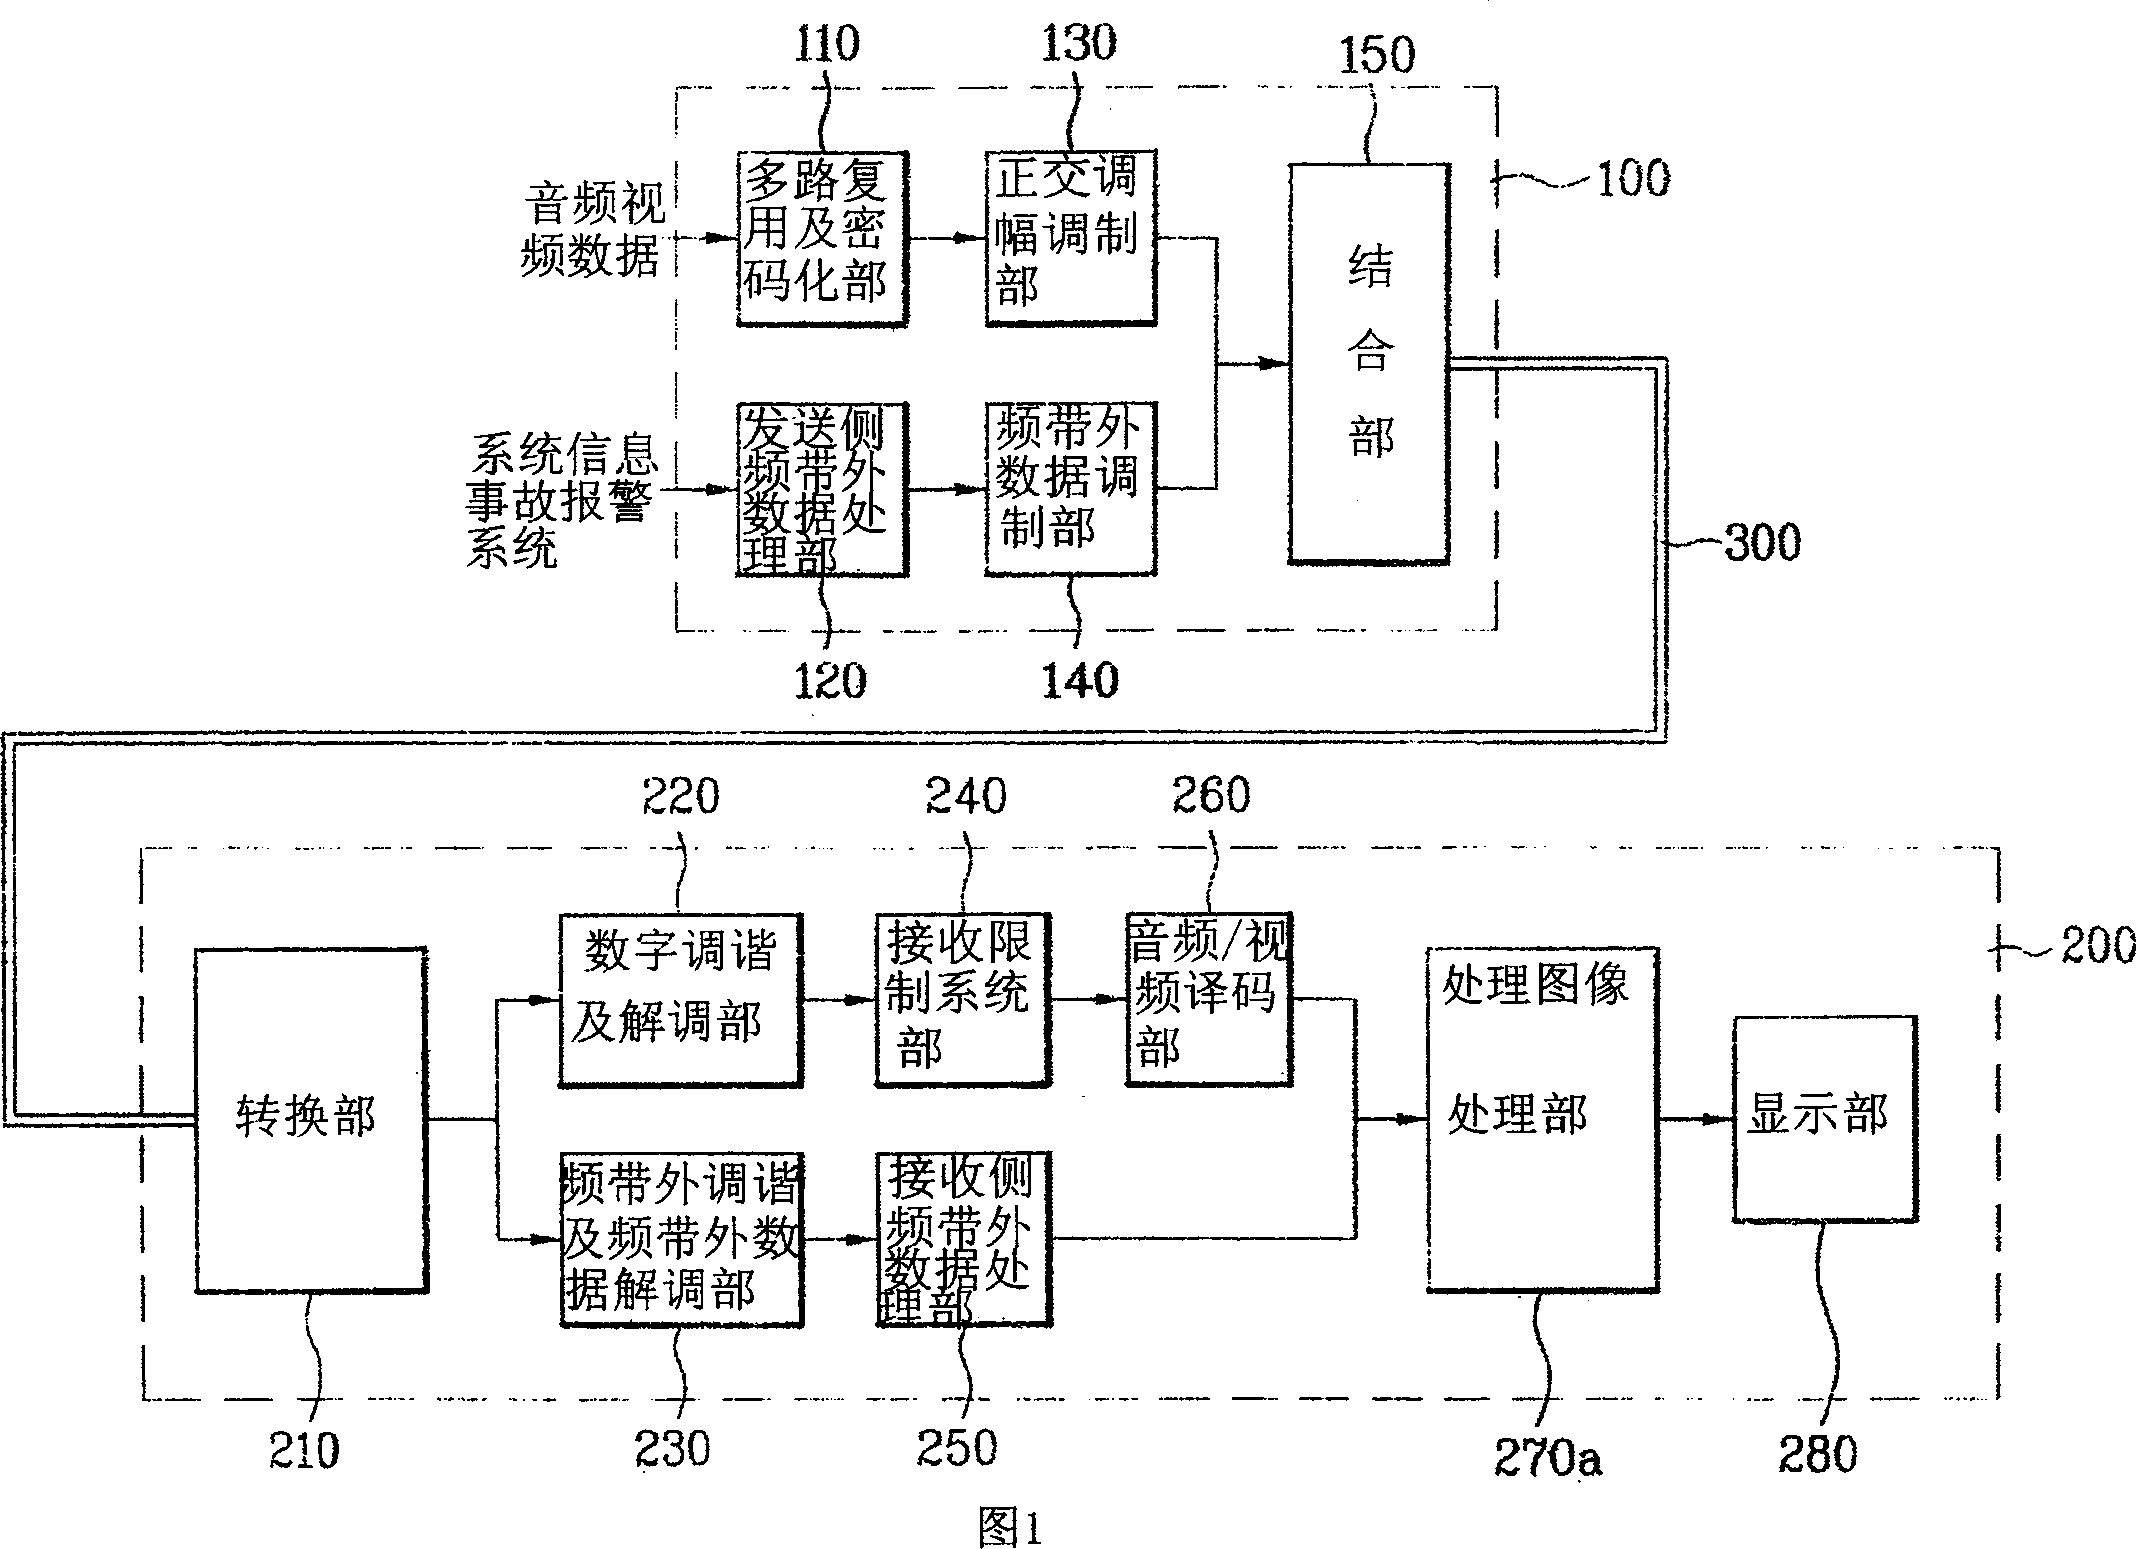 Digital wired broadcast system and the method for providing area information using the same